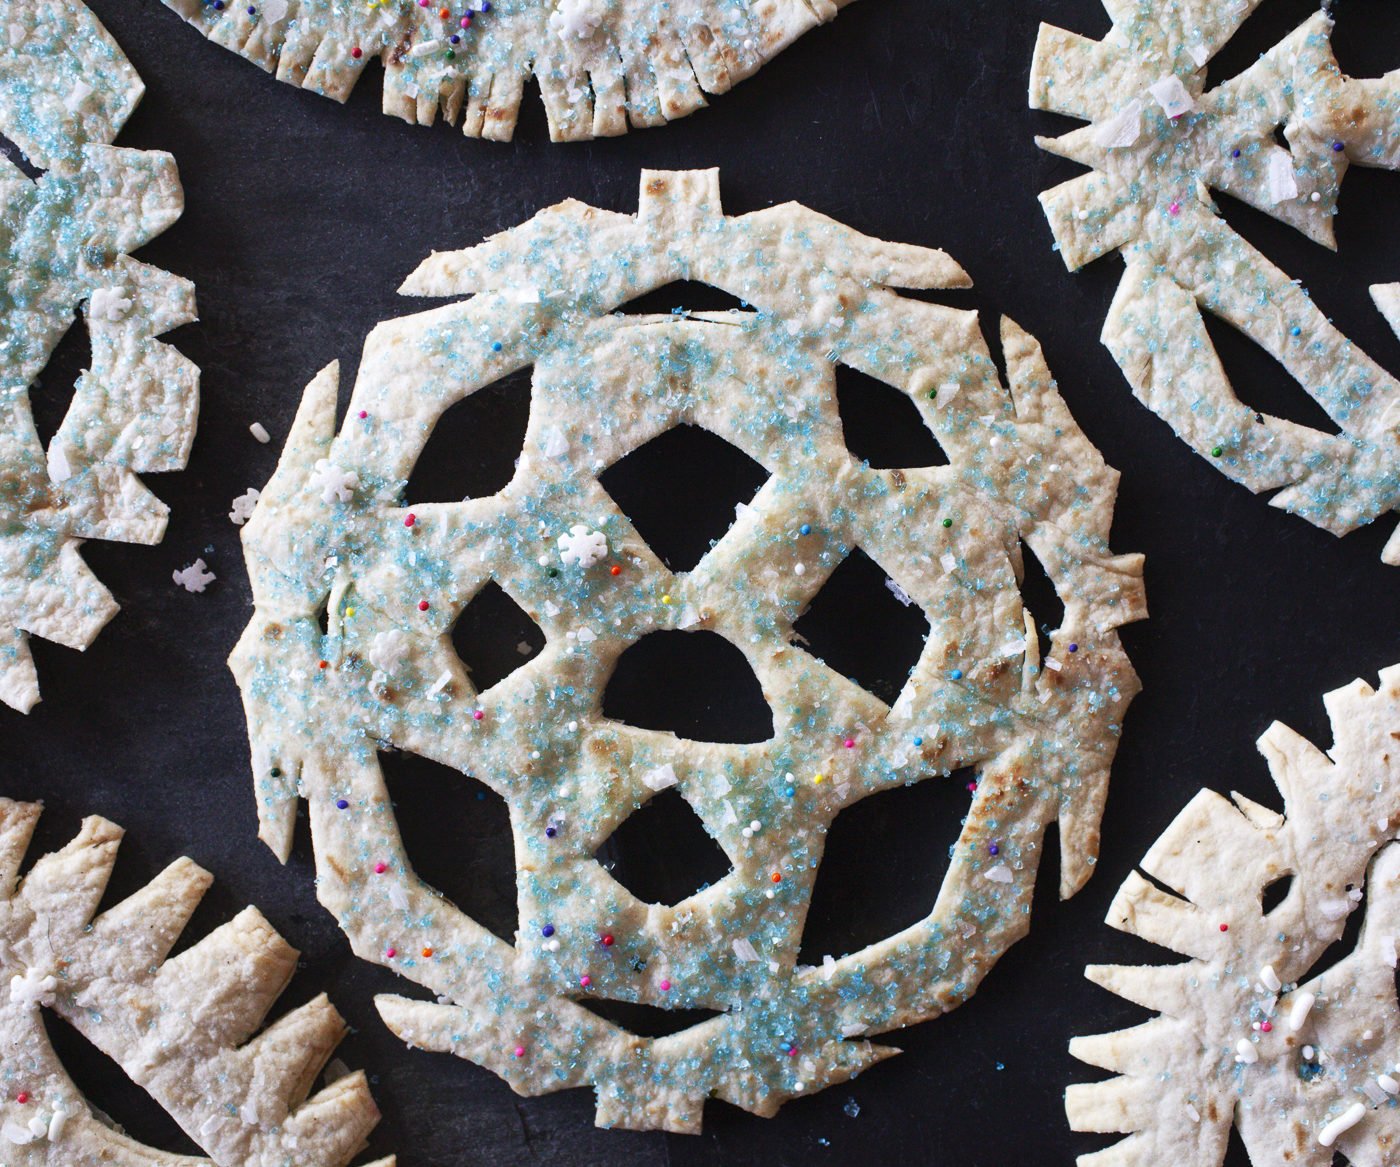 crunchy snowflakes made out of tortillas and sprinkles which resemble papel picado